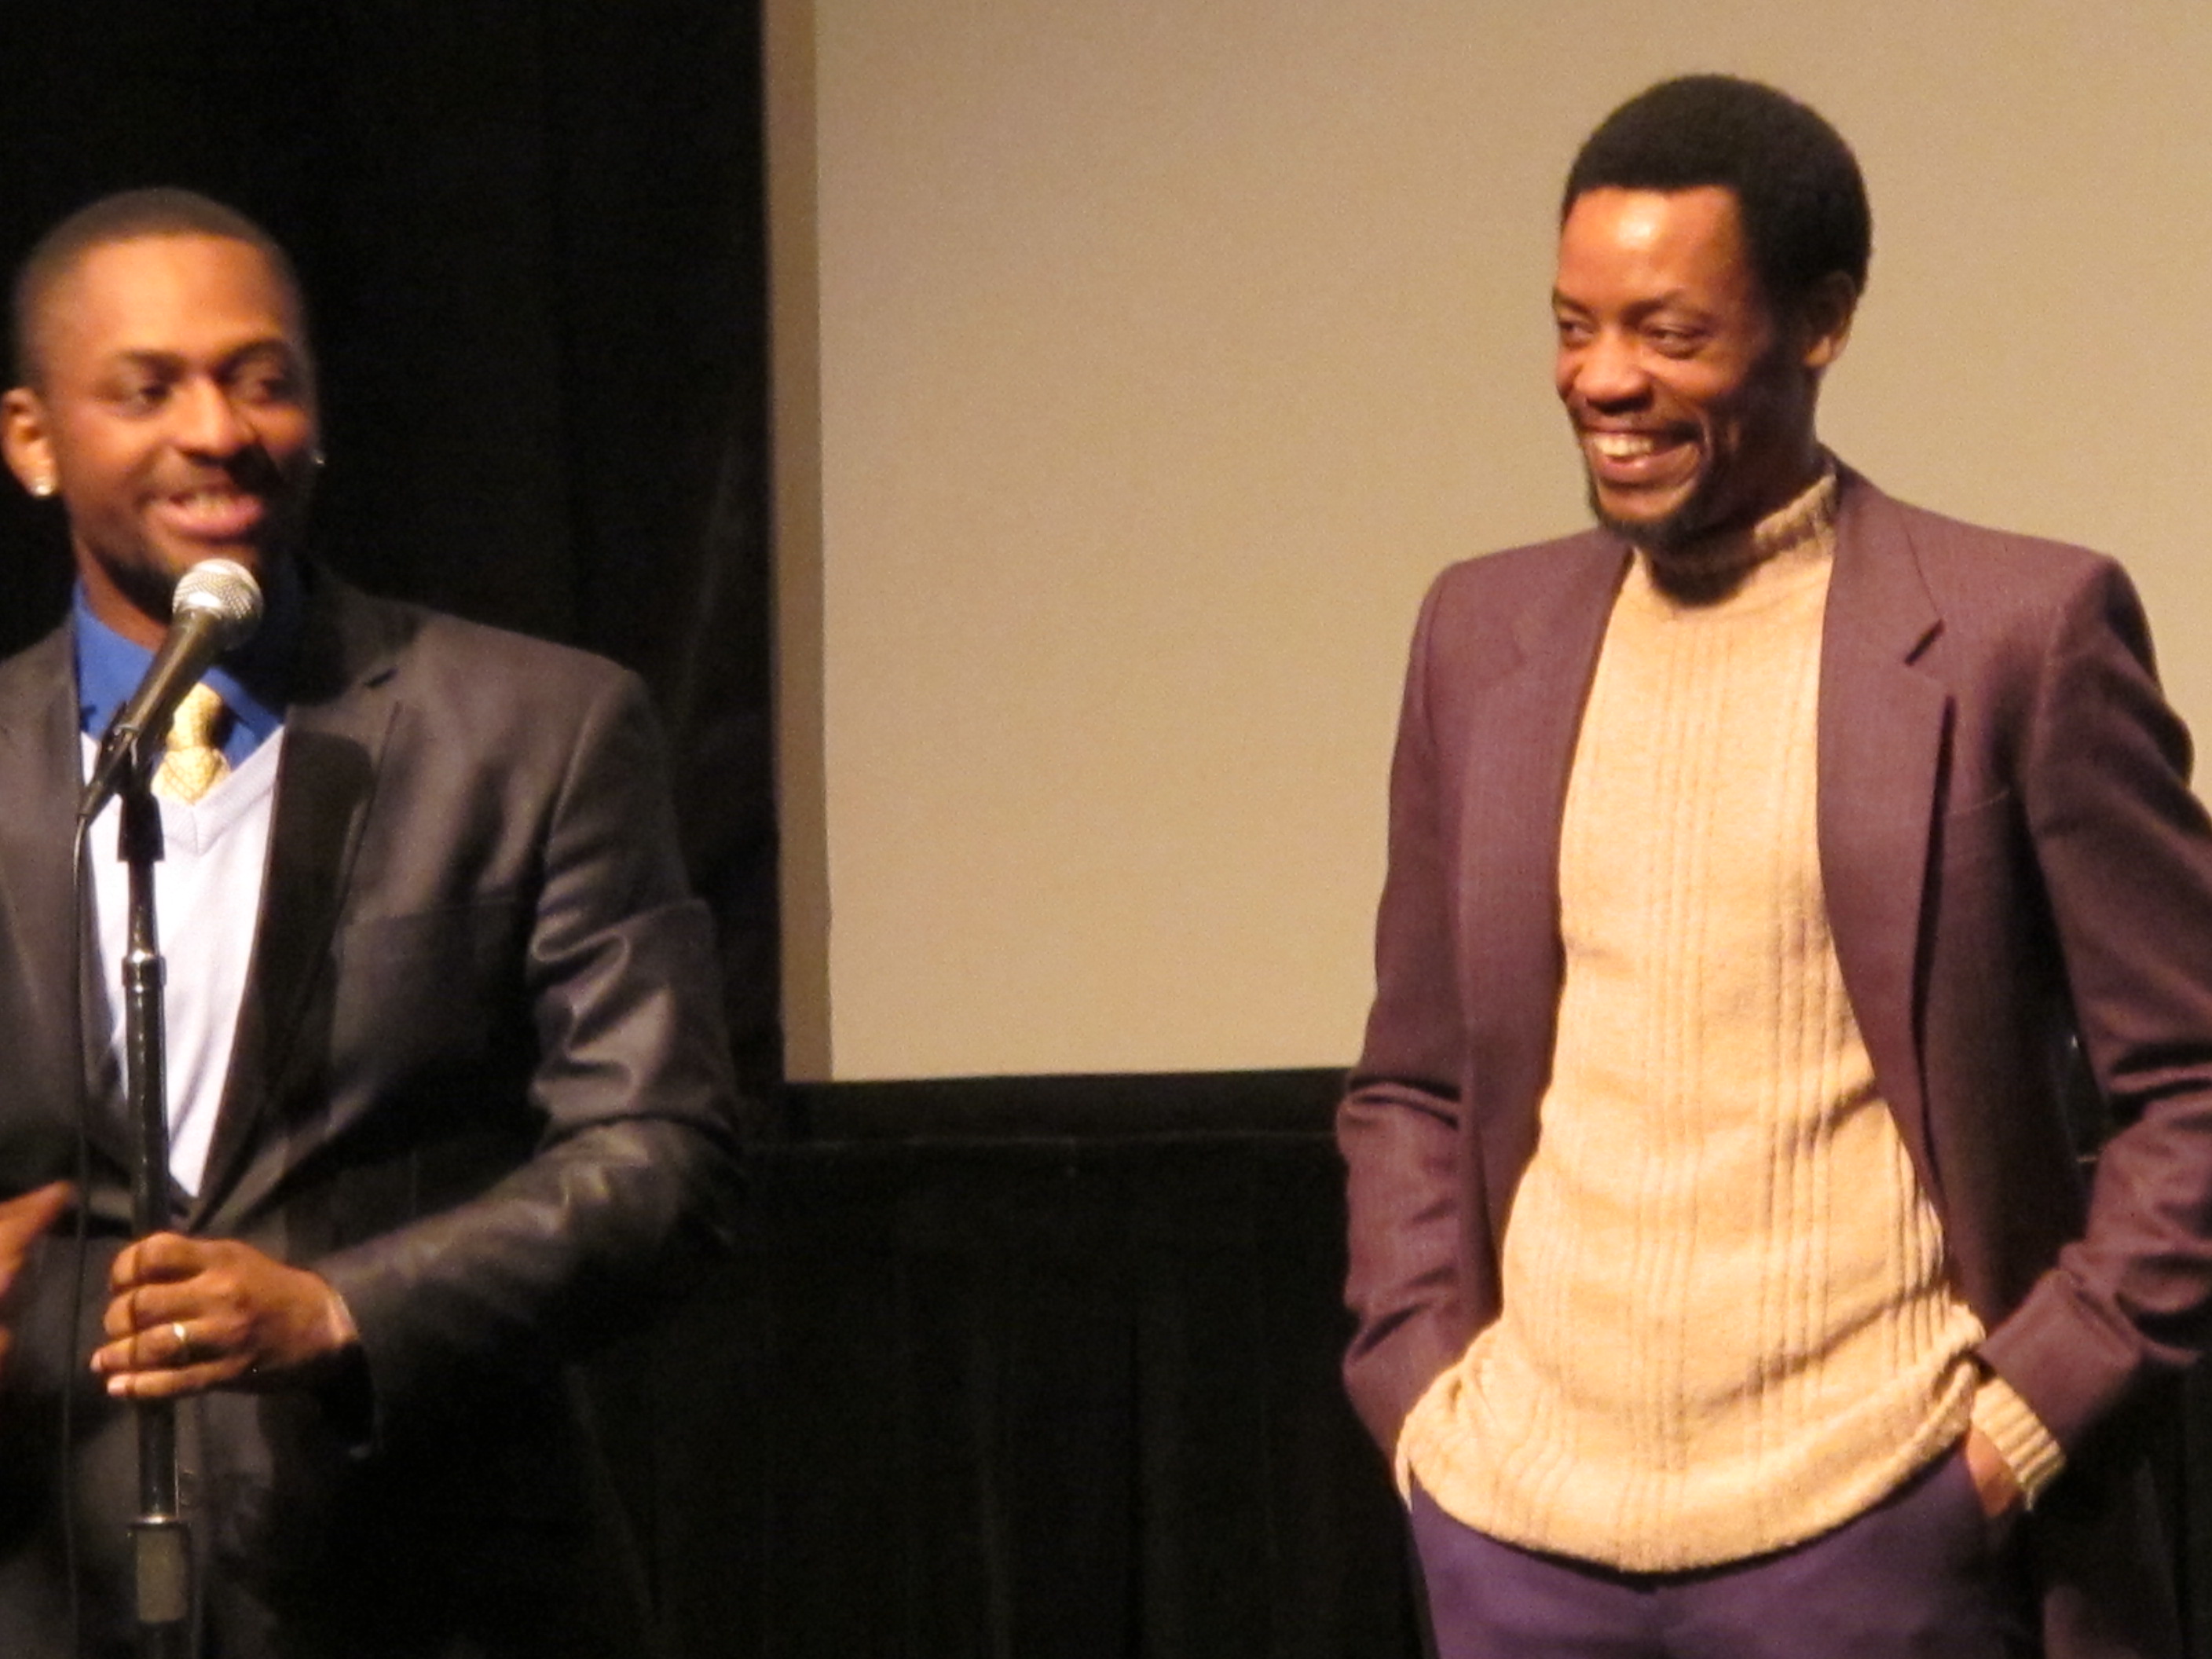 Introduction of Viva Riva! at the 18th New York African Film Festival with lead actor Patsha Bay